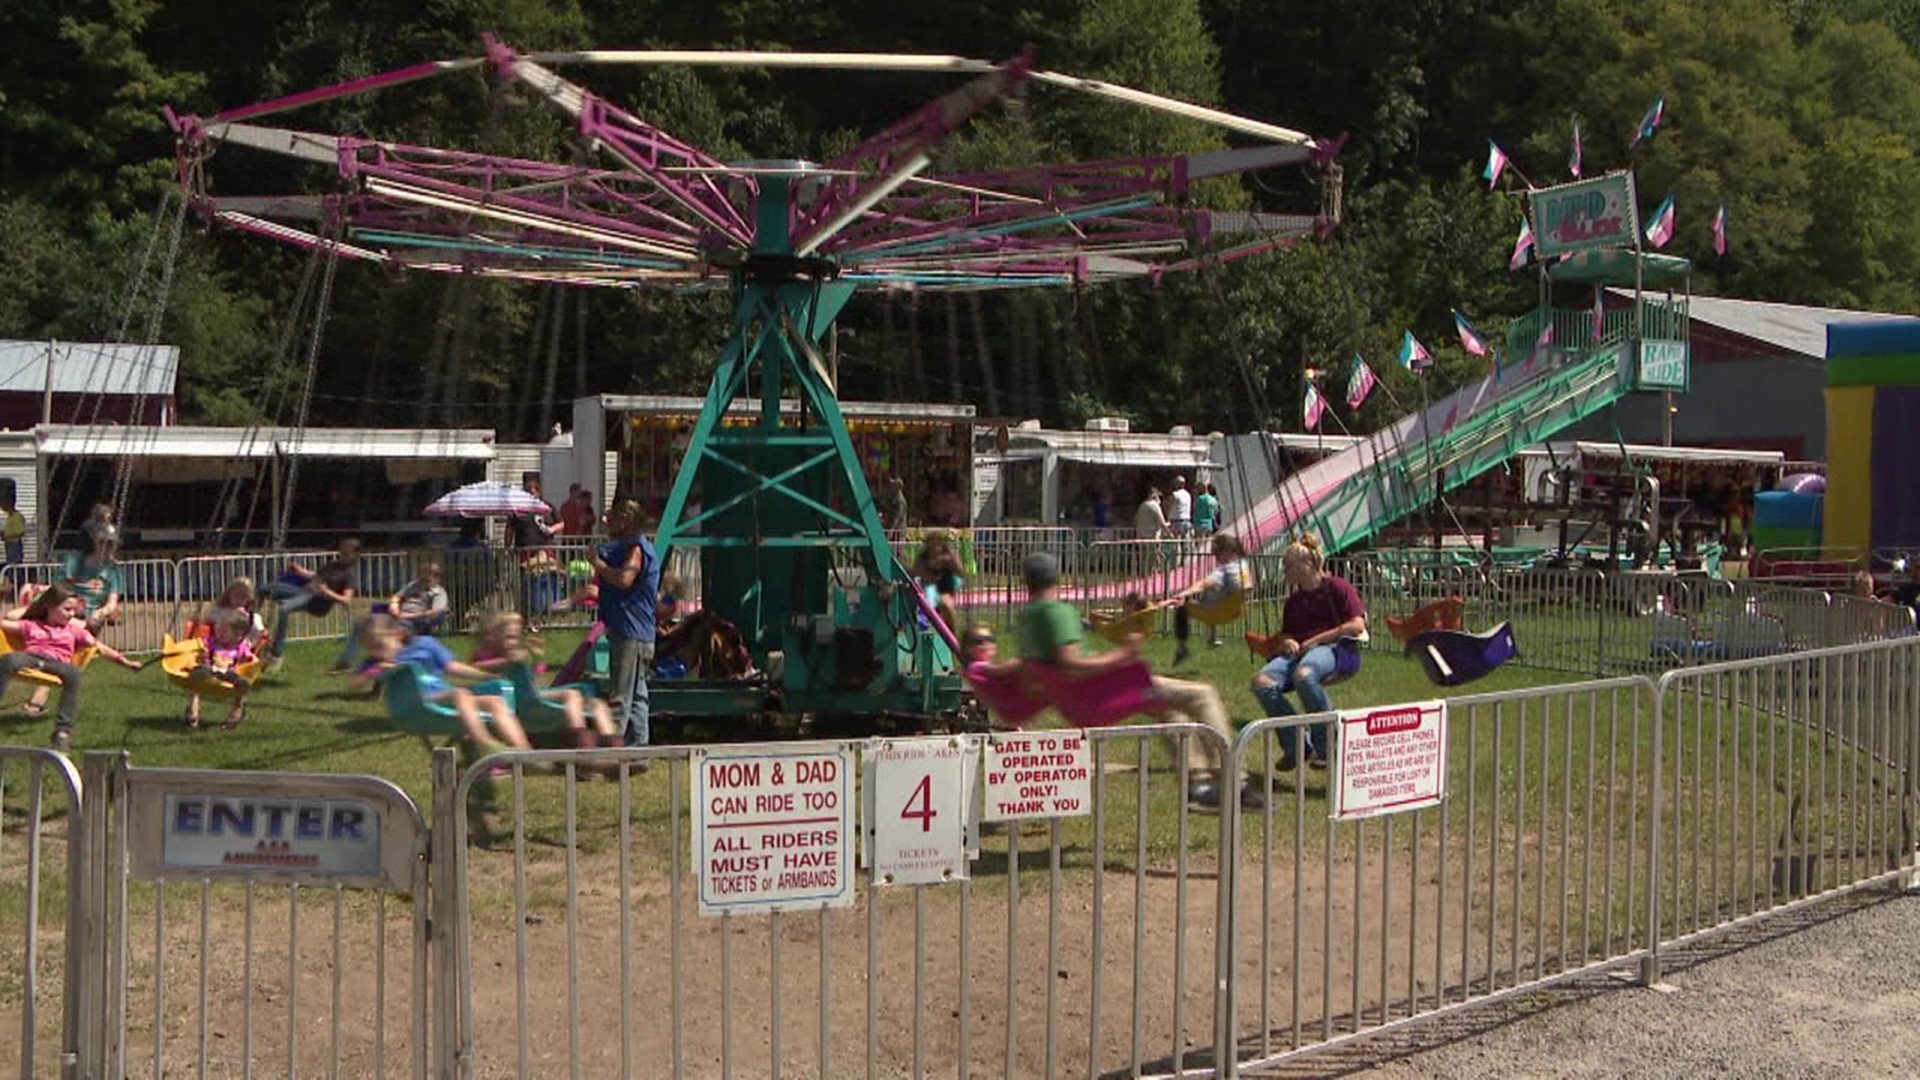 Sunday marked the last day of the Sullivan County Fair, but there was still plenty of fun to be had.